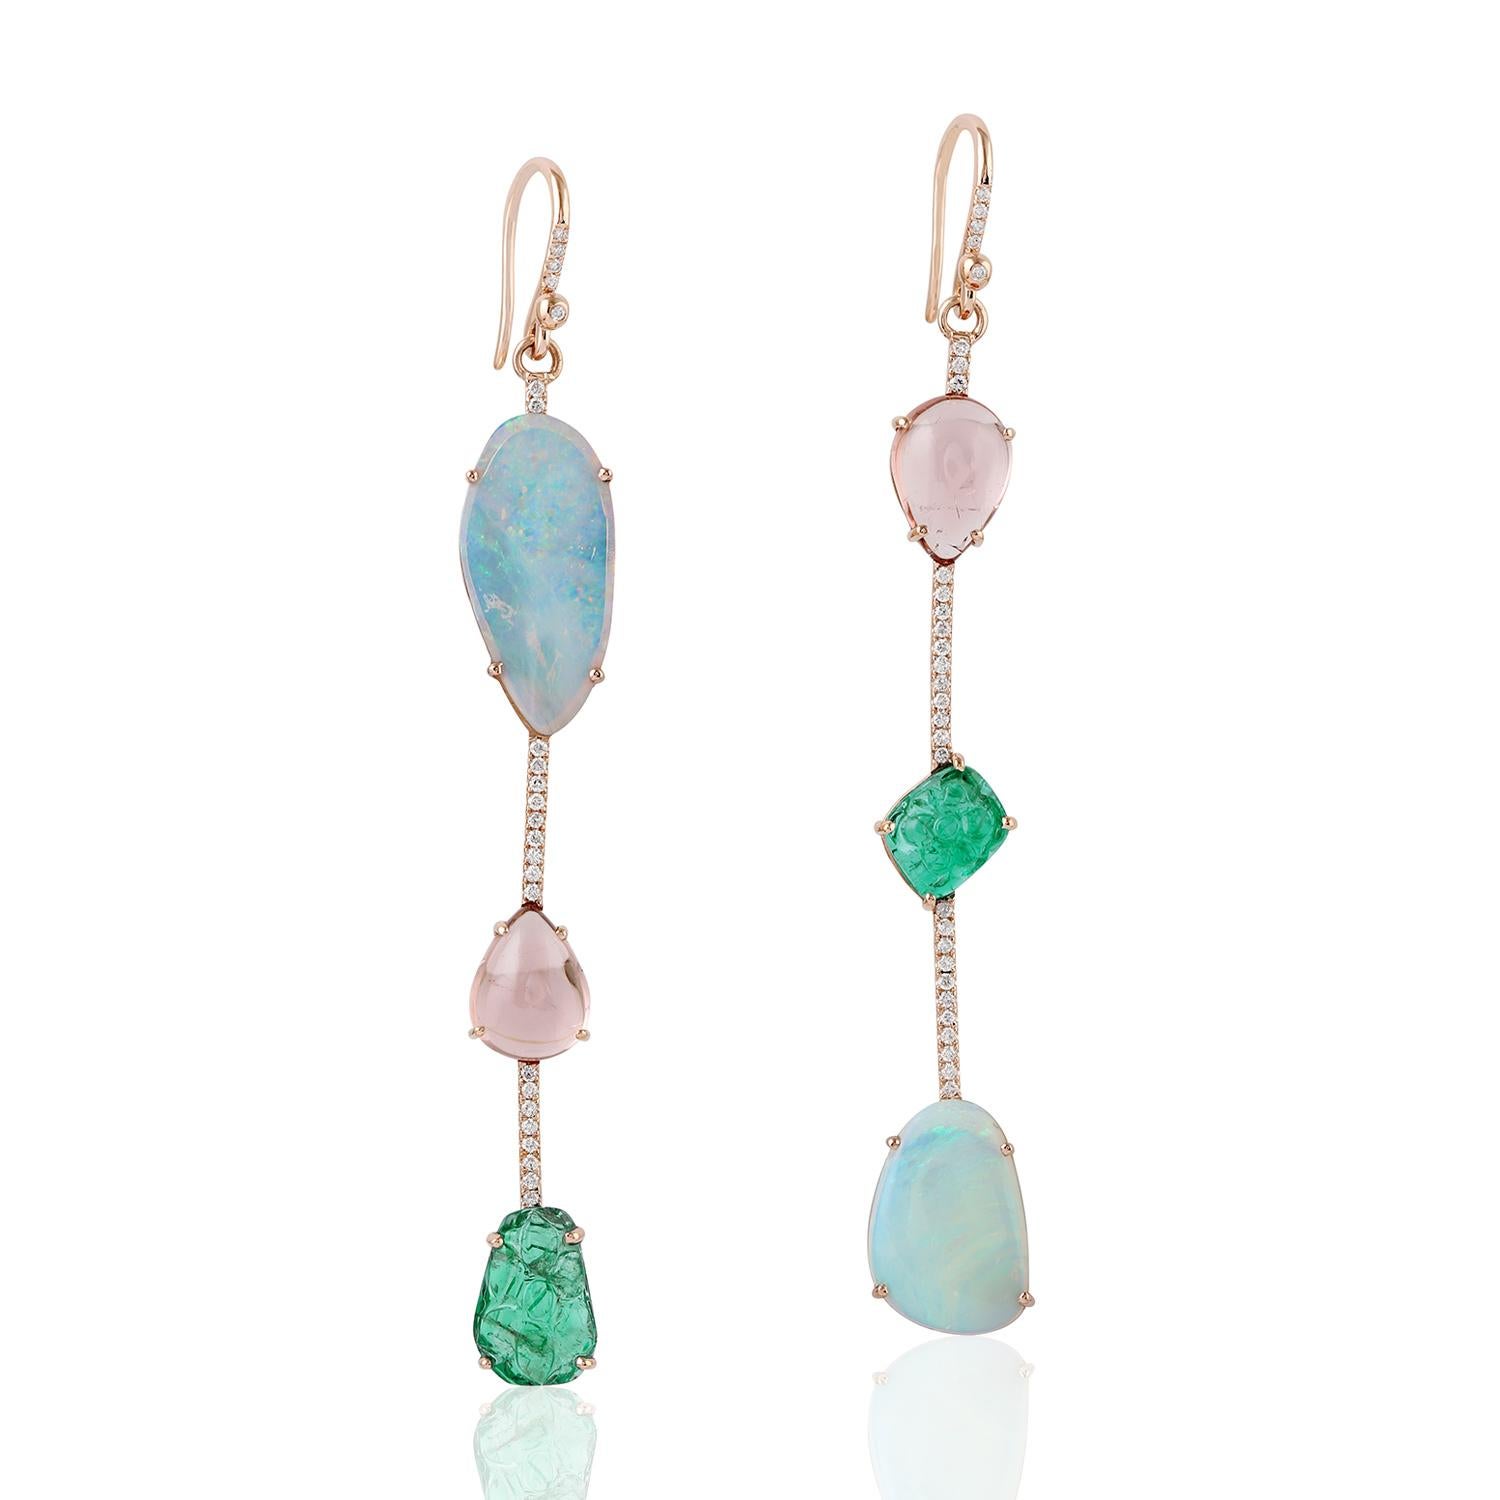 These beautiful linear drop earring are handcrafted in 18-karat gold. It is set with 4.25 carats Emerald, 4.57 carats Ethiopian opal, tourmaline and .31 carats of glimmering diamonds.

FOLLOW  MEGHNA JEWELS storefront to view the latest collection &